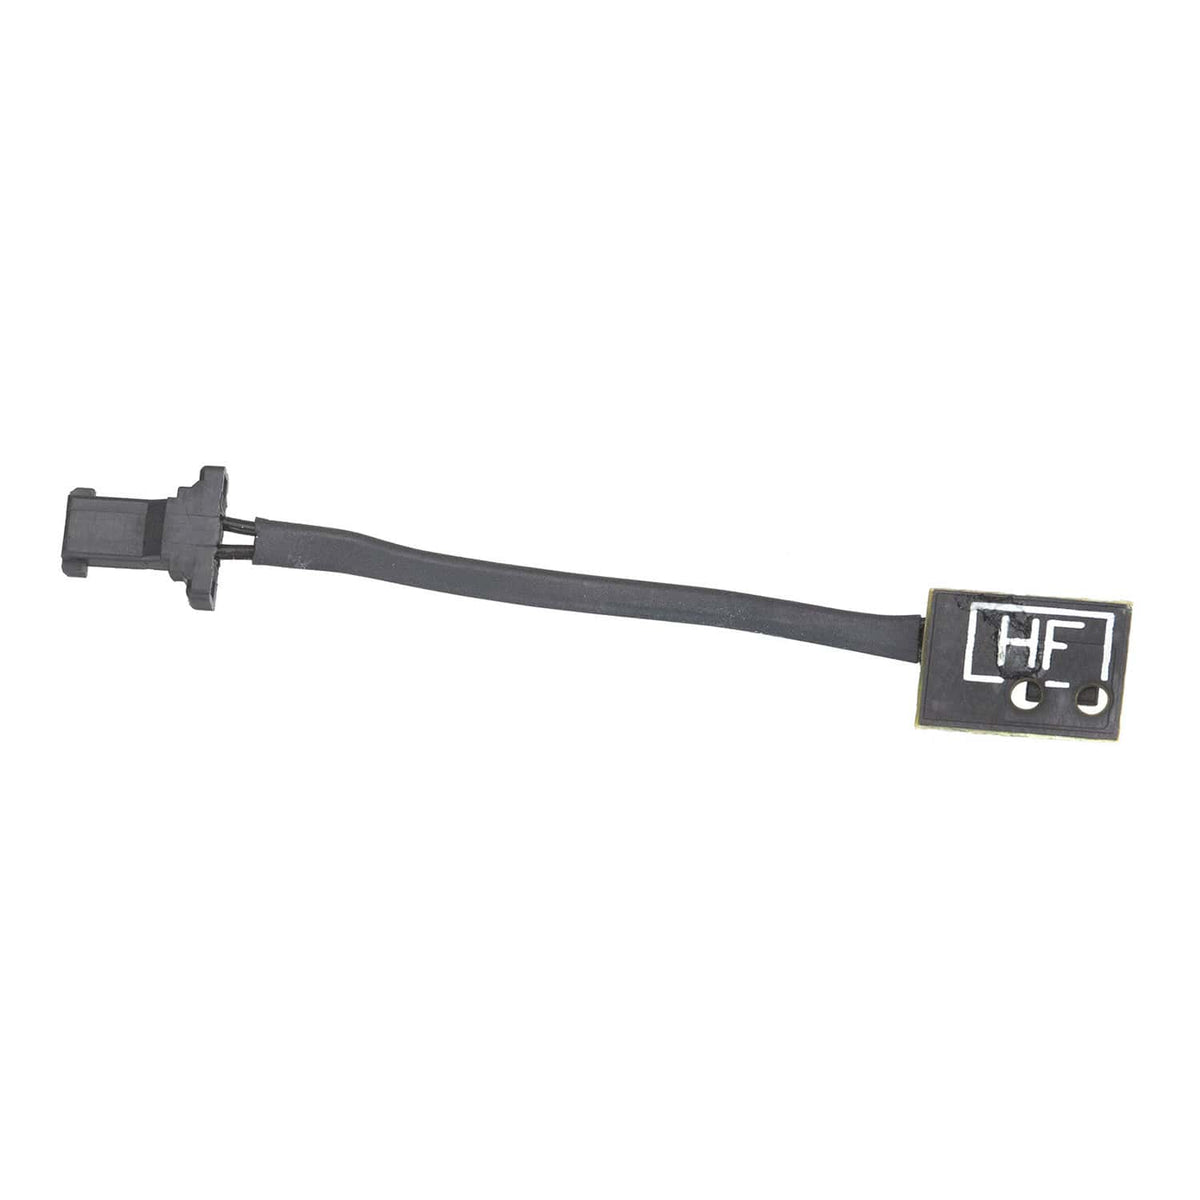 LCD DISPLAY TEMPERATURE SENSOR CABLE FOR IMAC 21.5" A1418 (LATE 2012, MID 2017)